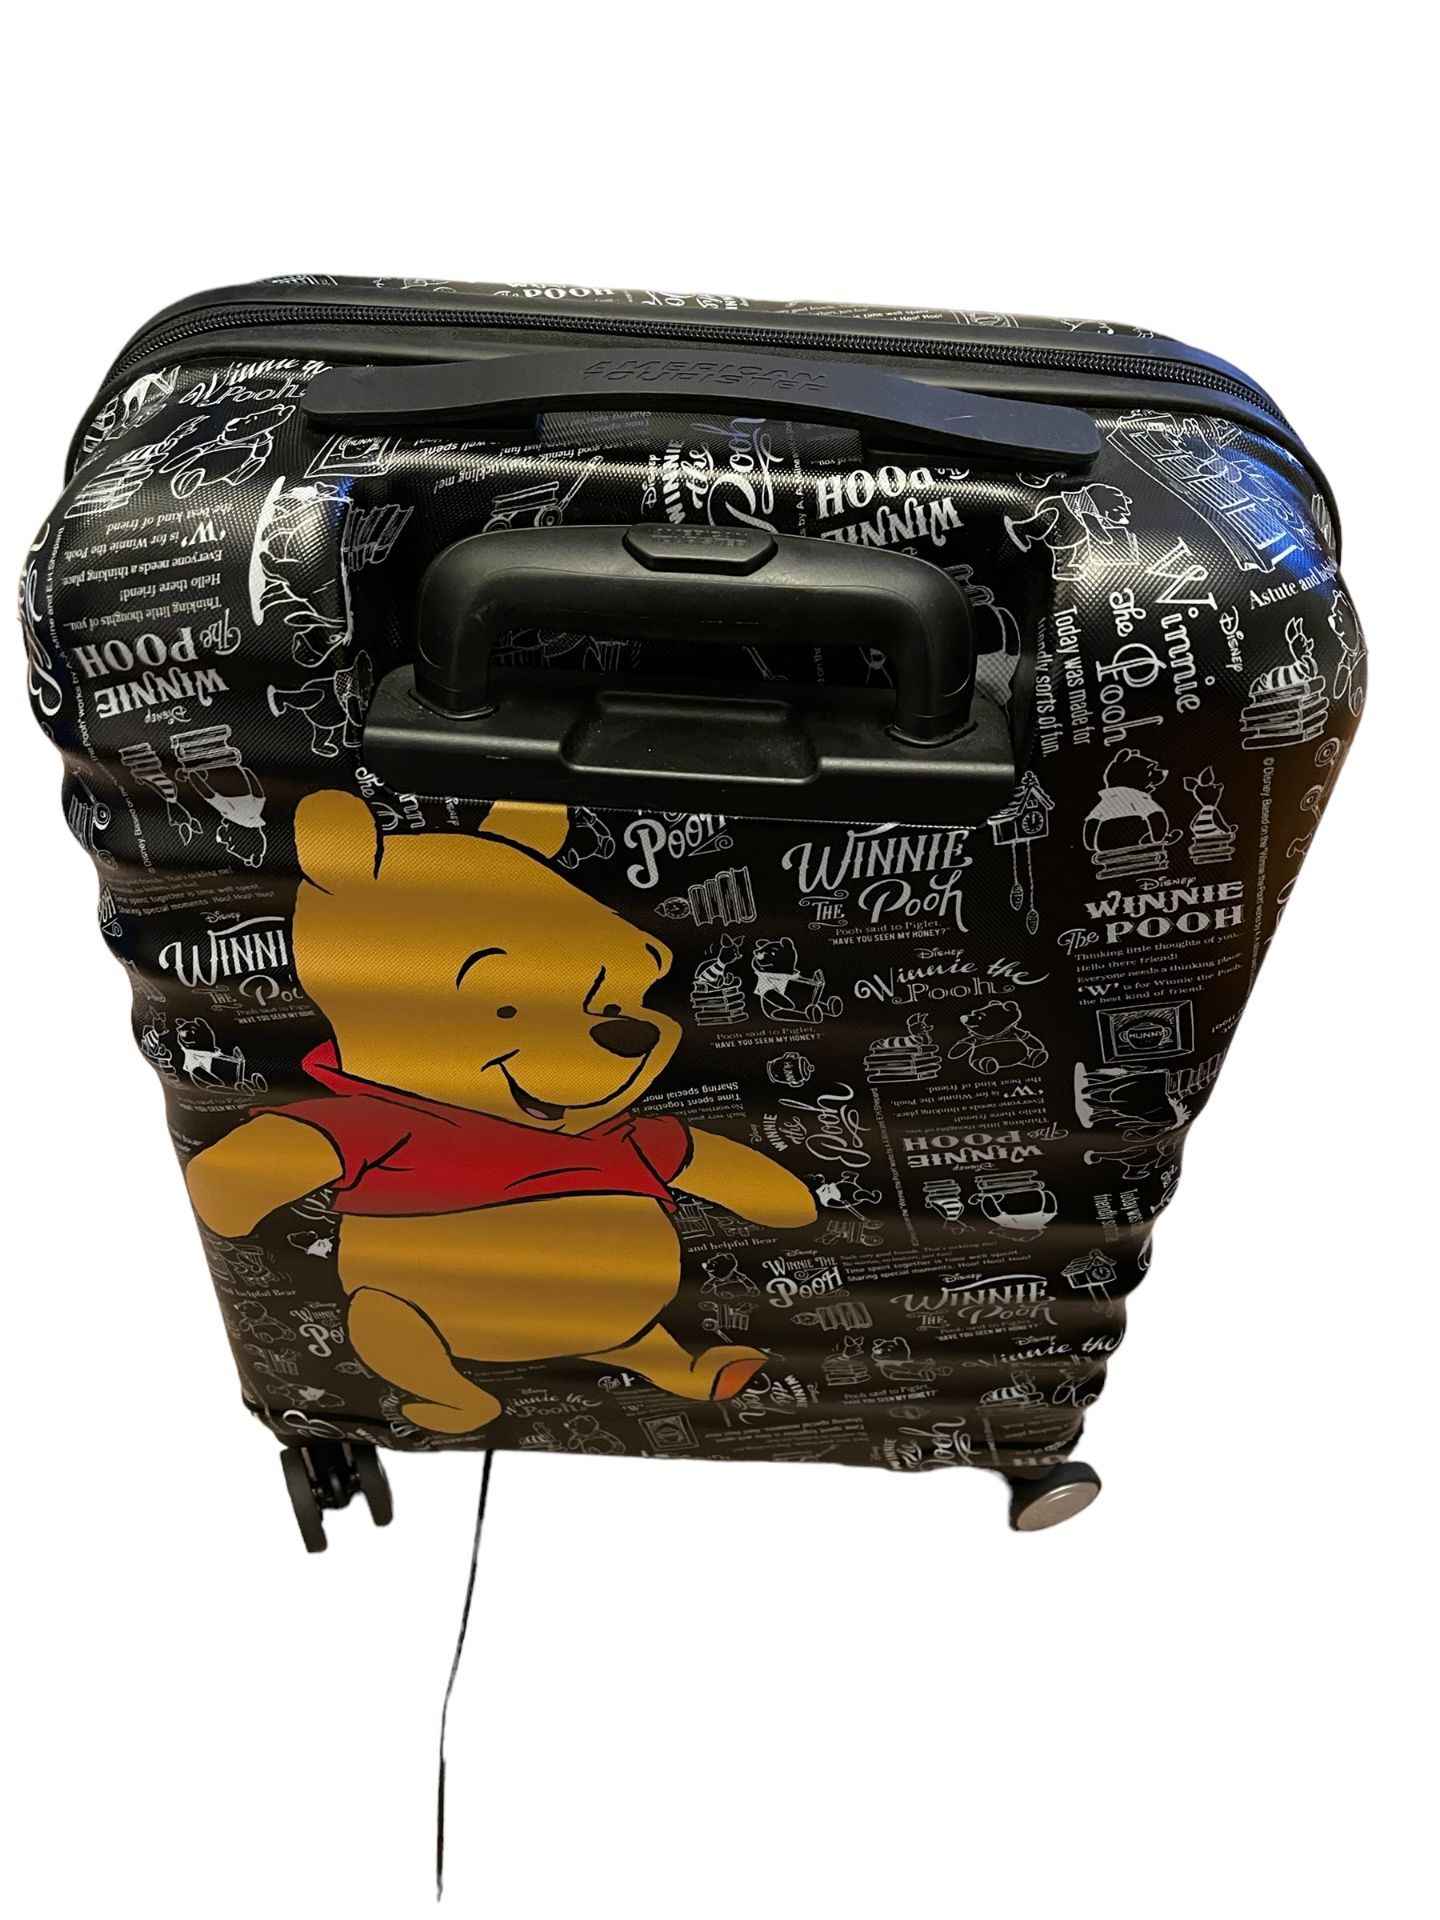 Lost Property, Disney Winnie the Pooh Case, Contents Include Designer Shoes & Sunglasses - Image 4 of 4